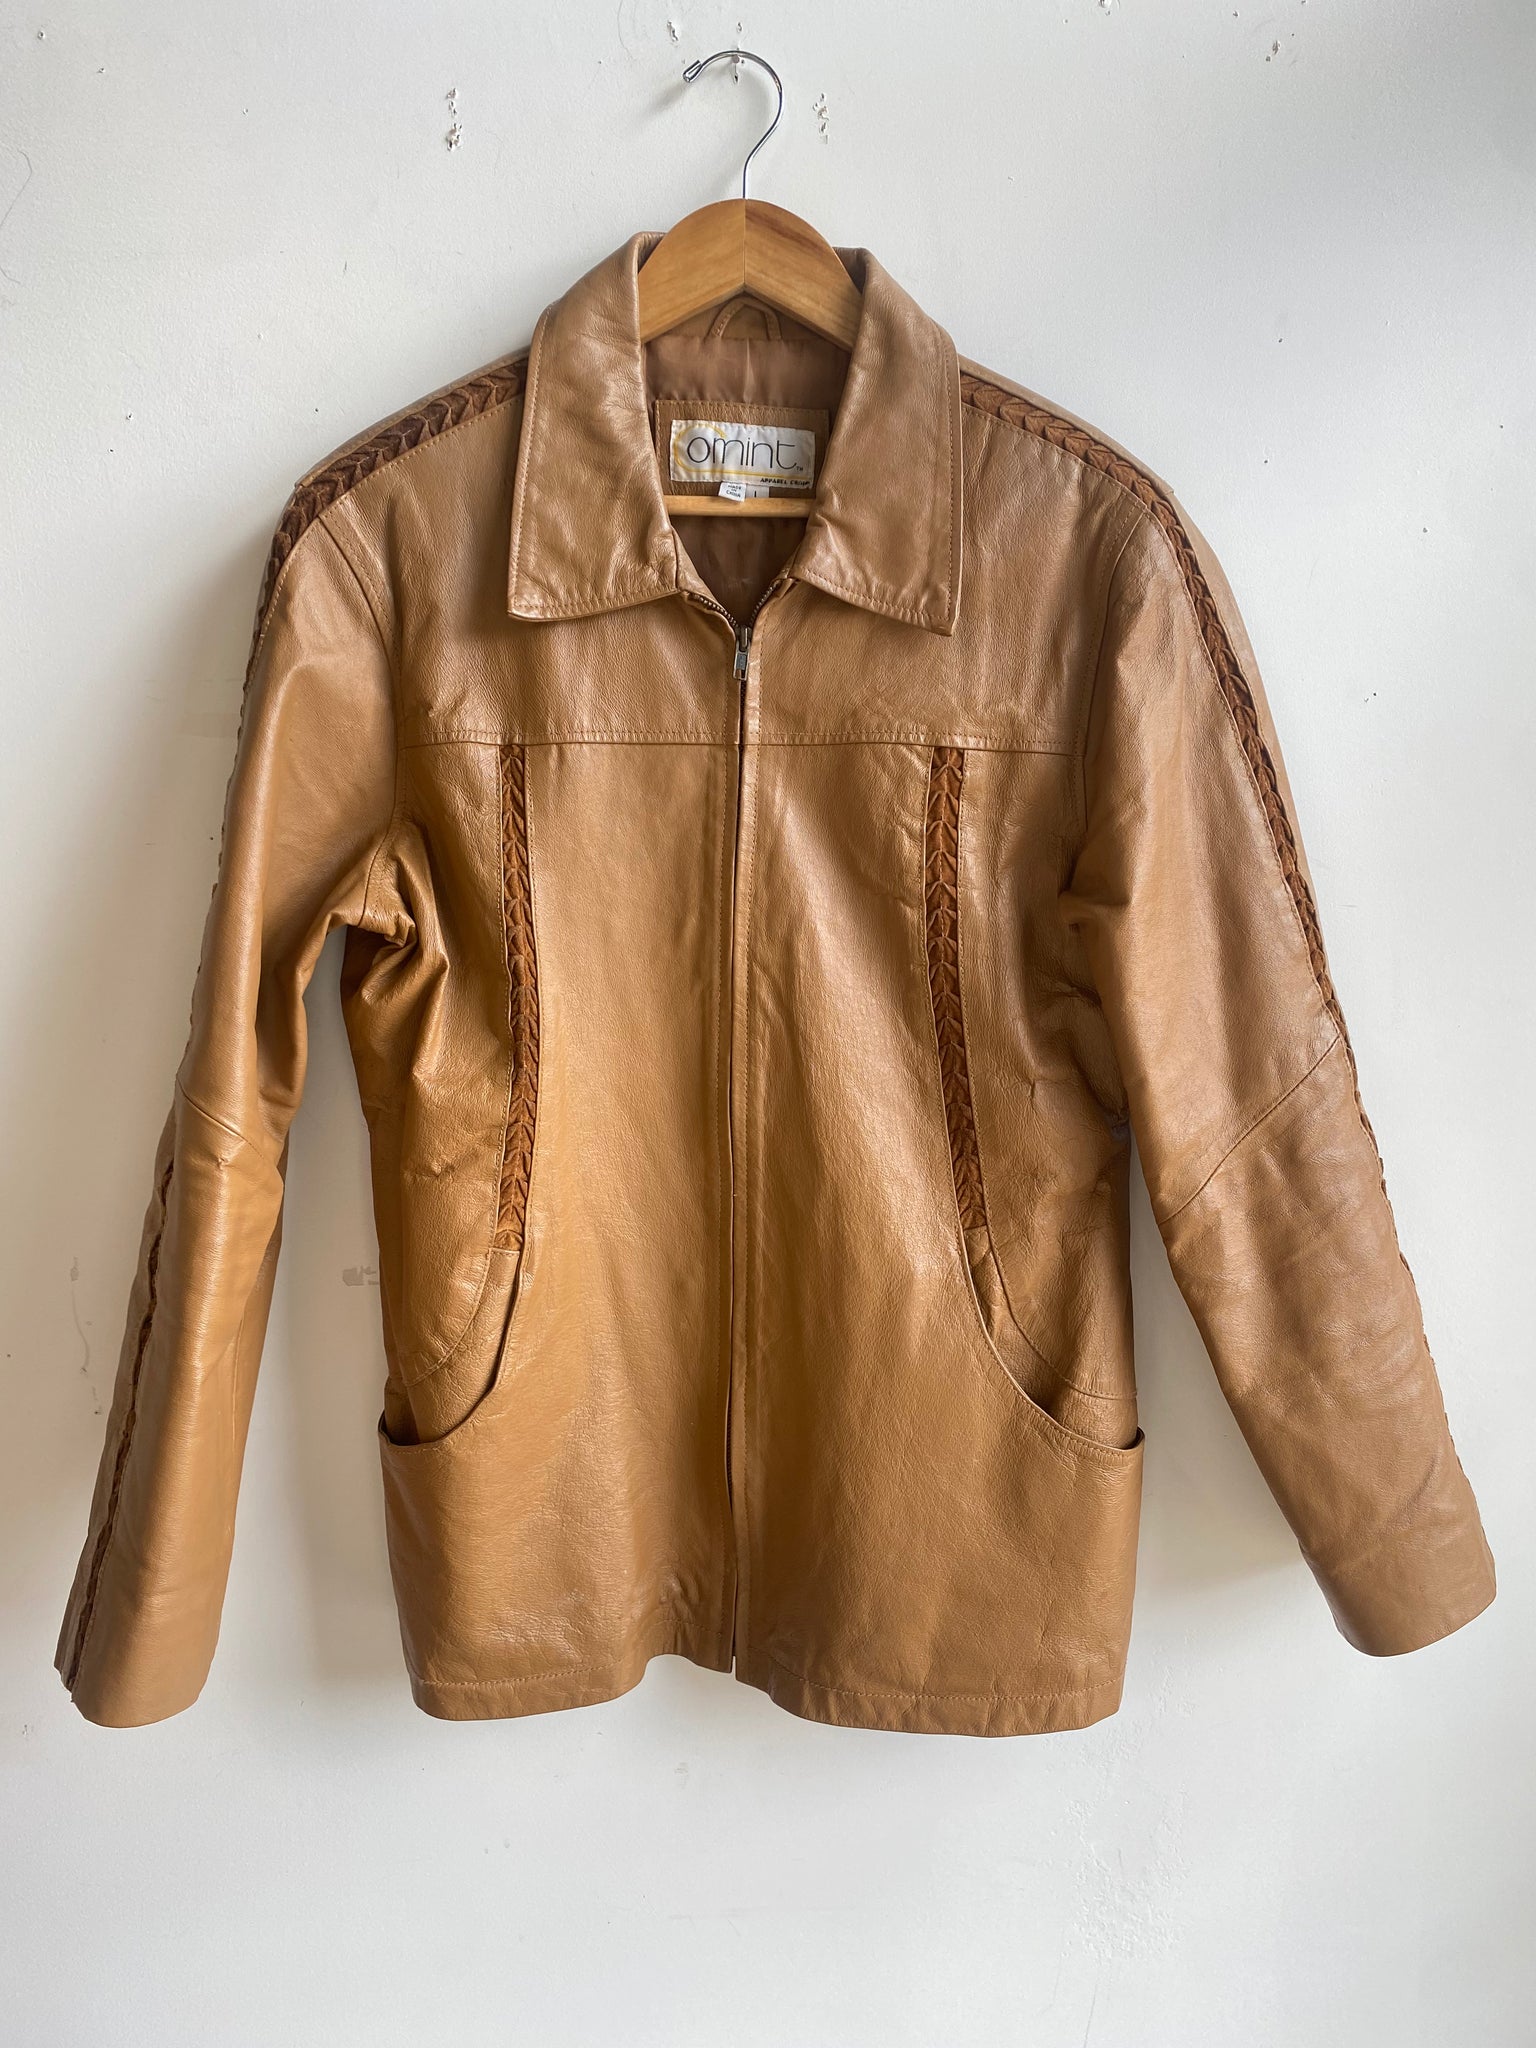 80s "Comint" Leather Jacket